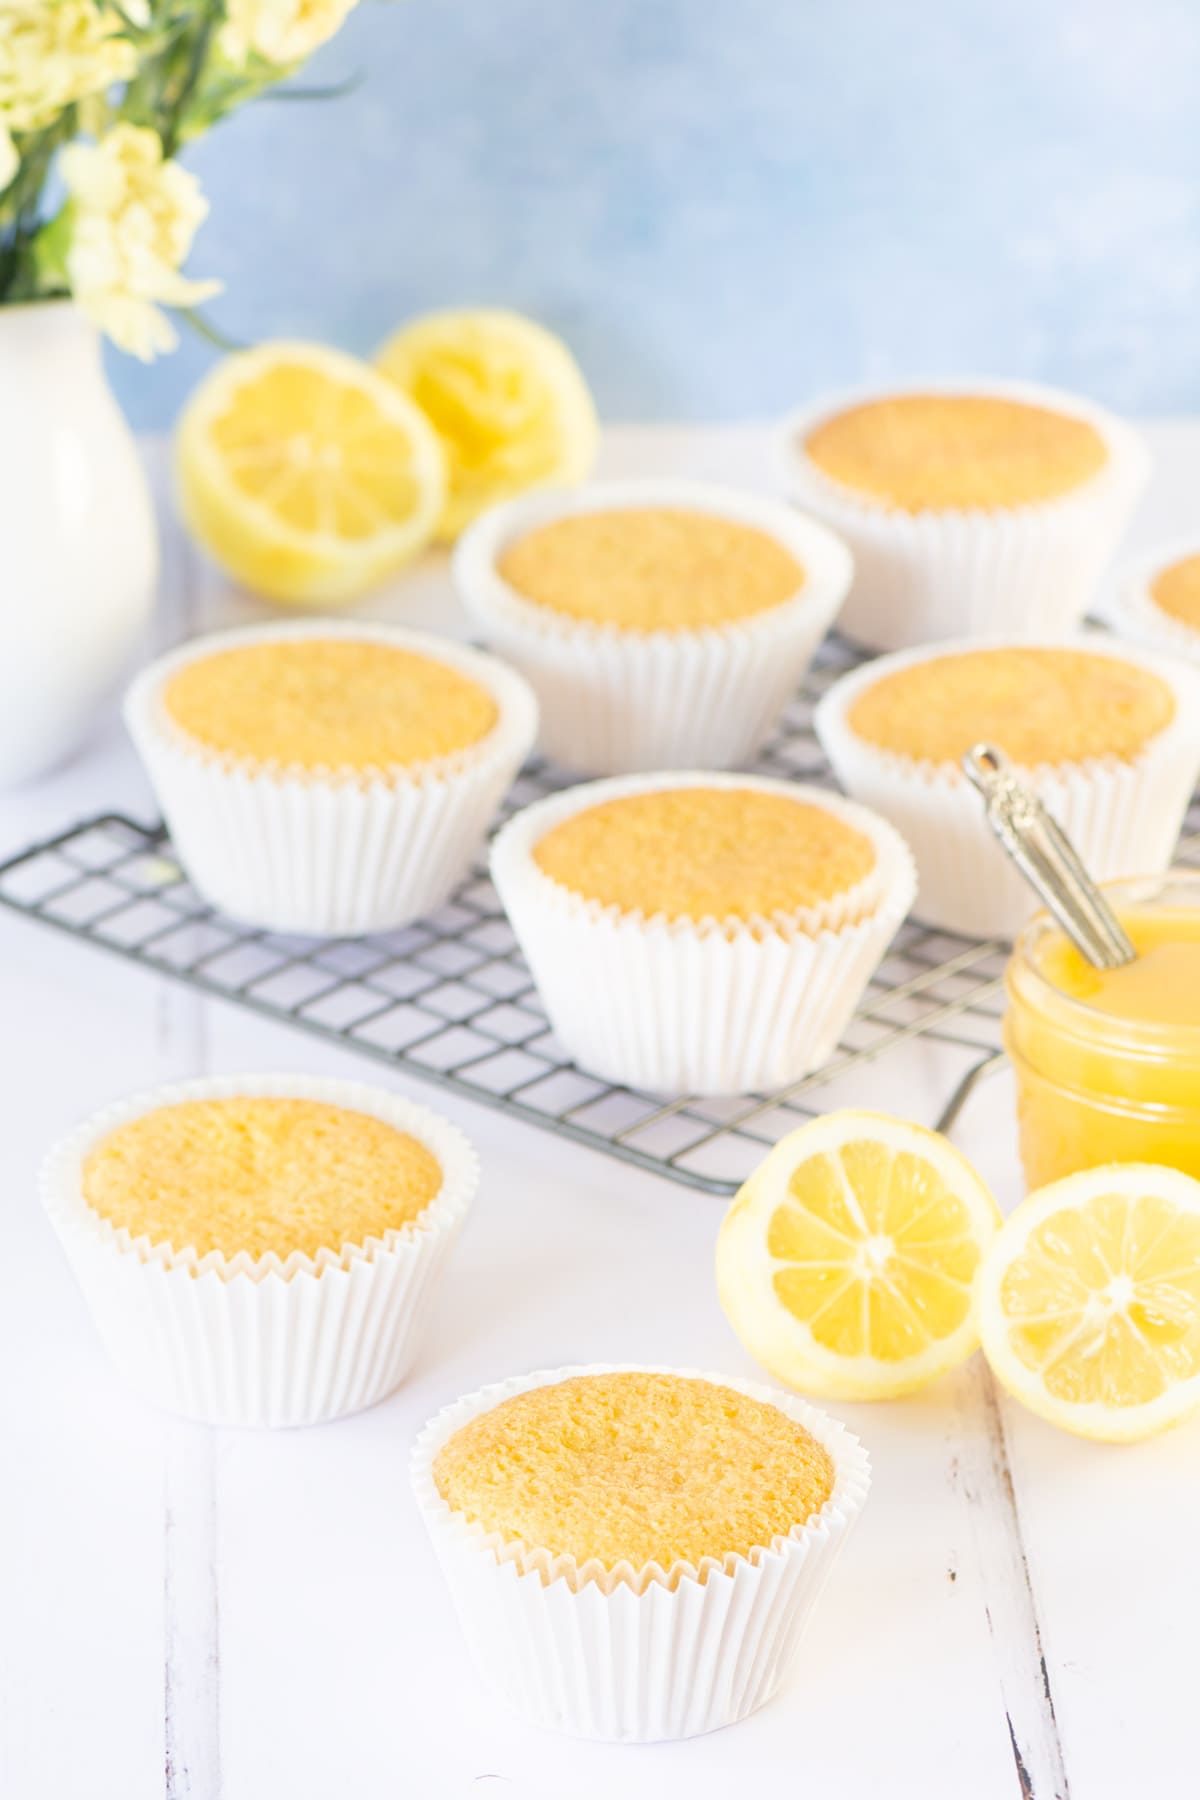 Lemon cupcakes without buttercream in white cupcake cases. Some on the table and some on a cooling rack. There are lemons, lemon curd and yellow flowers in the background.